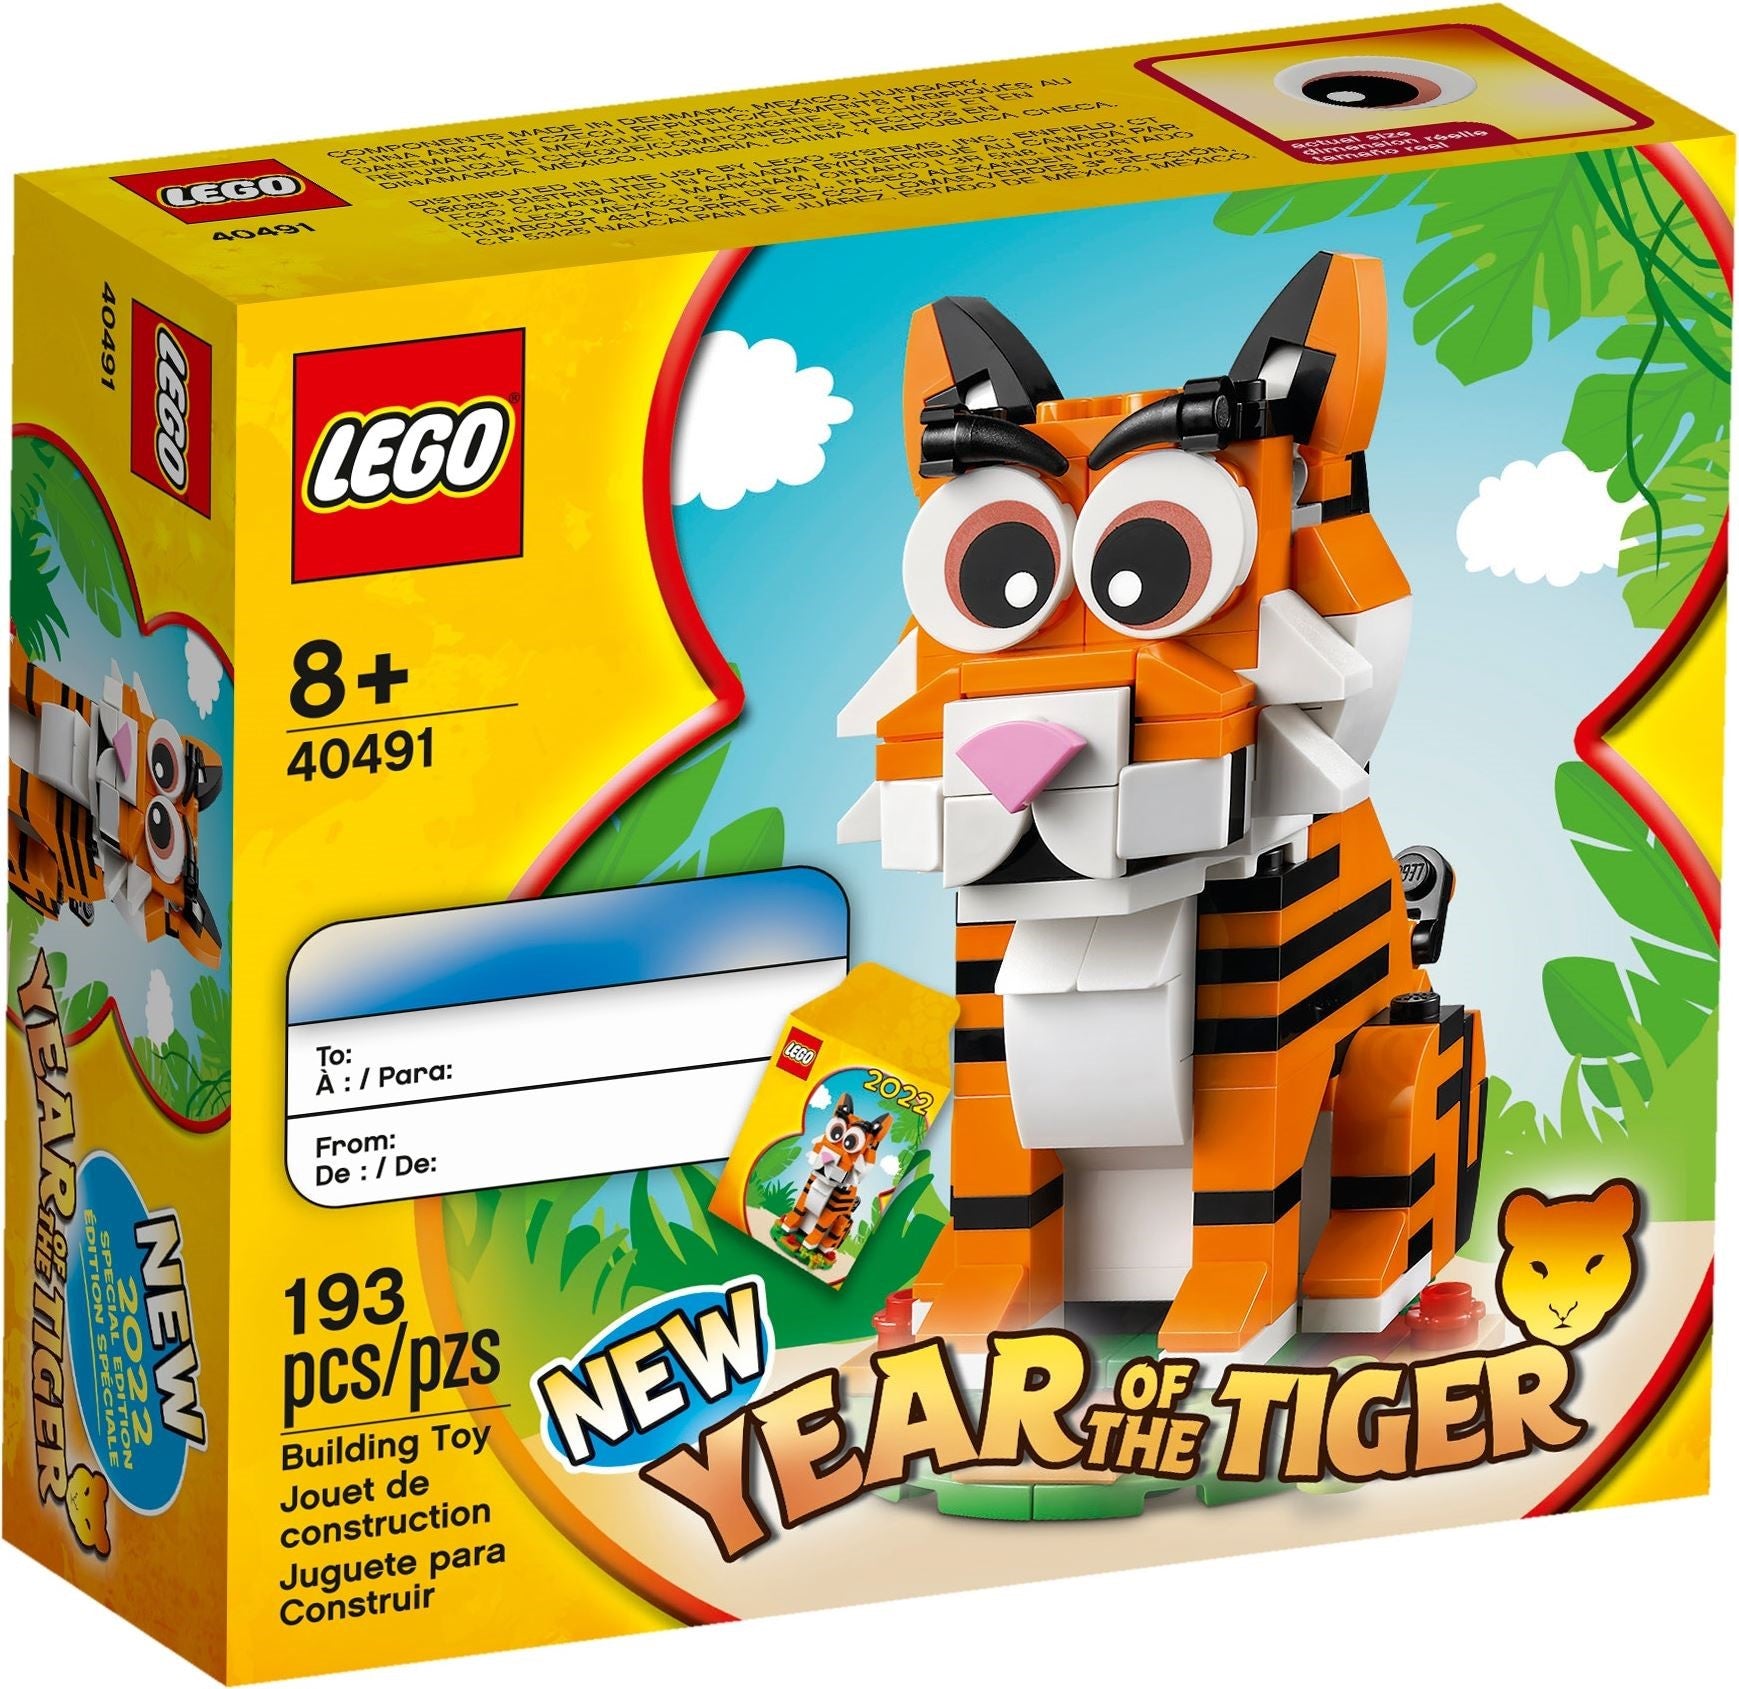 Lego Exclusive 40491 - Year of the Tiger